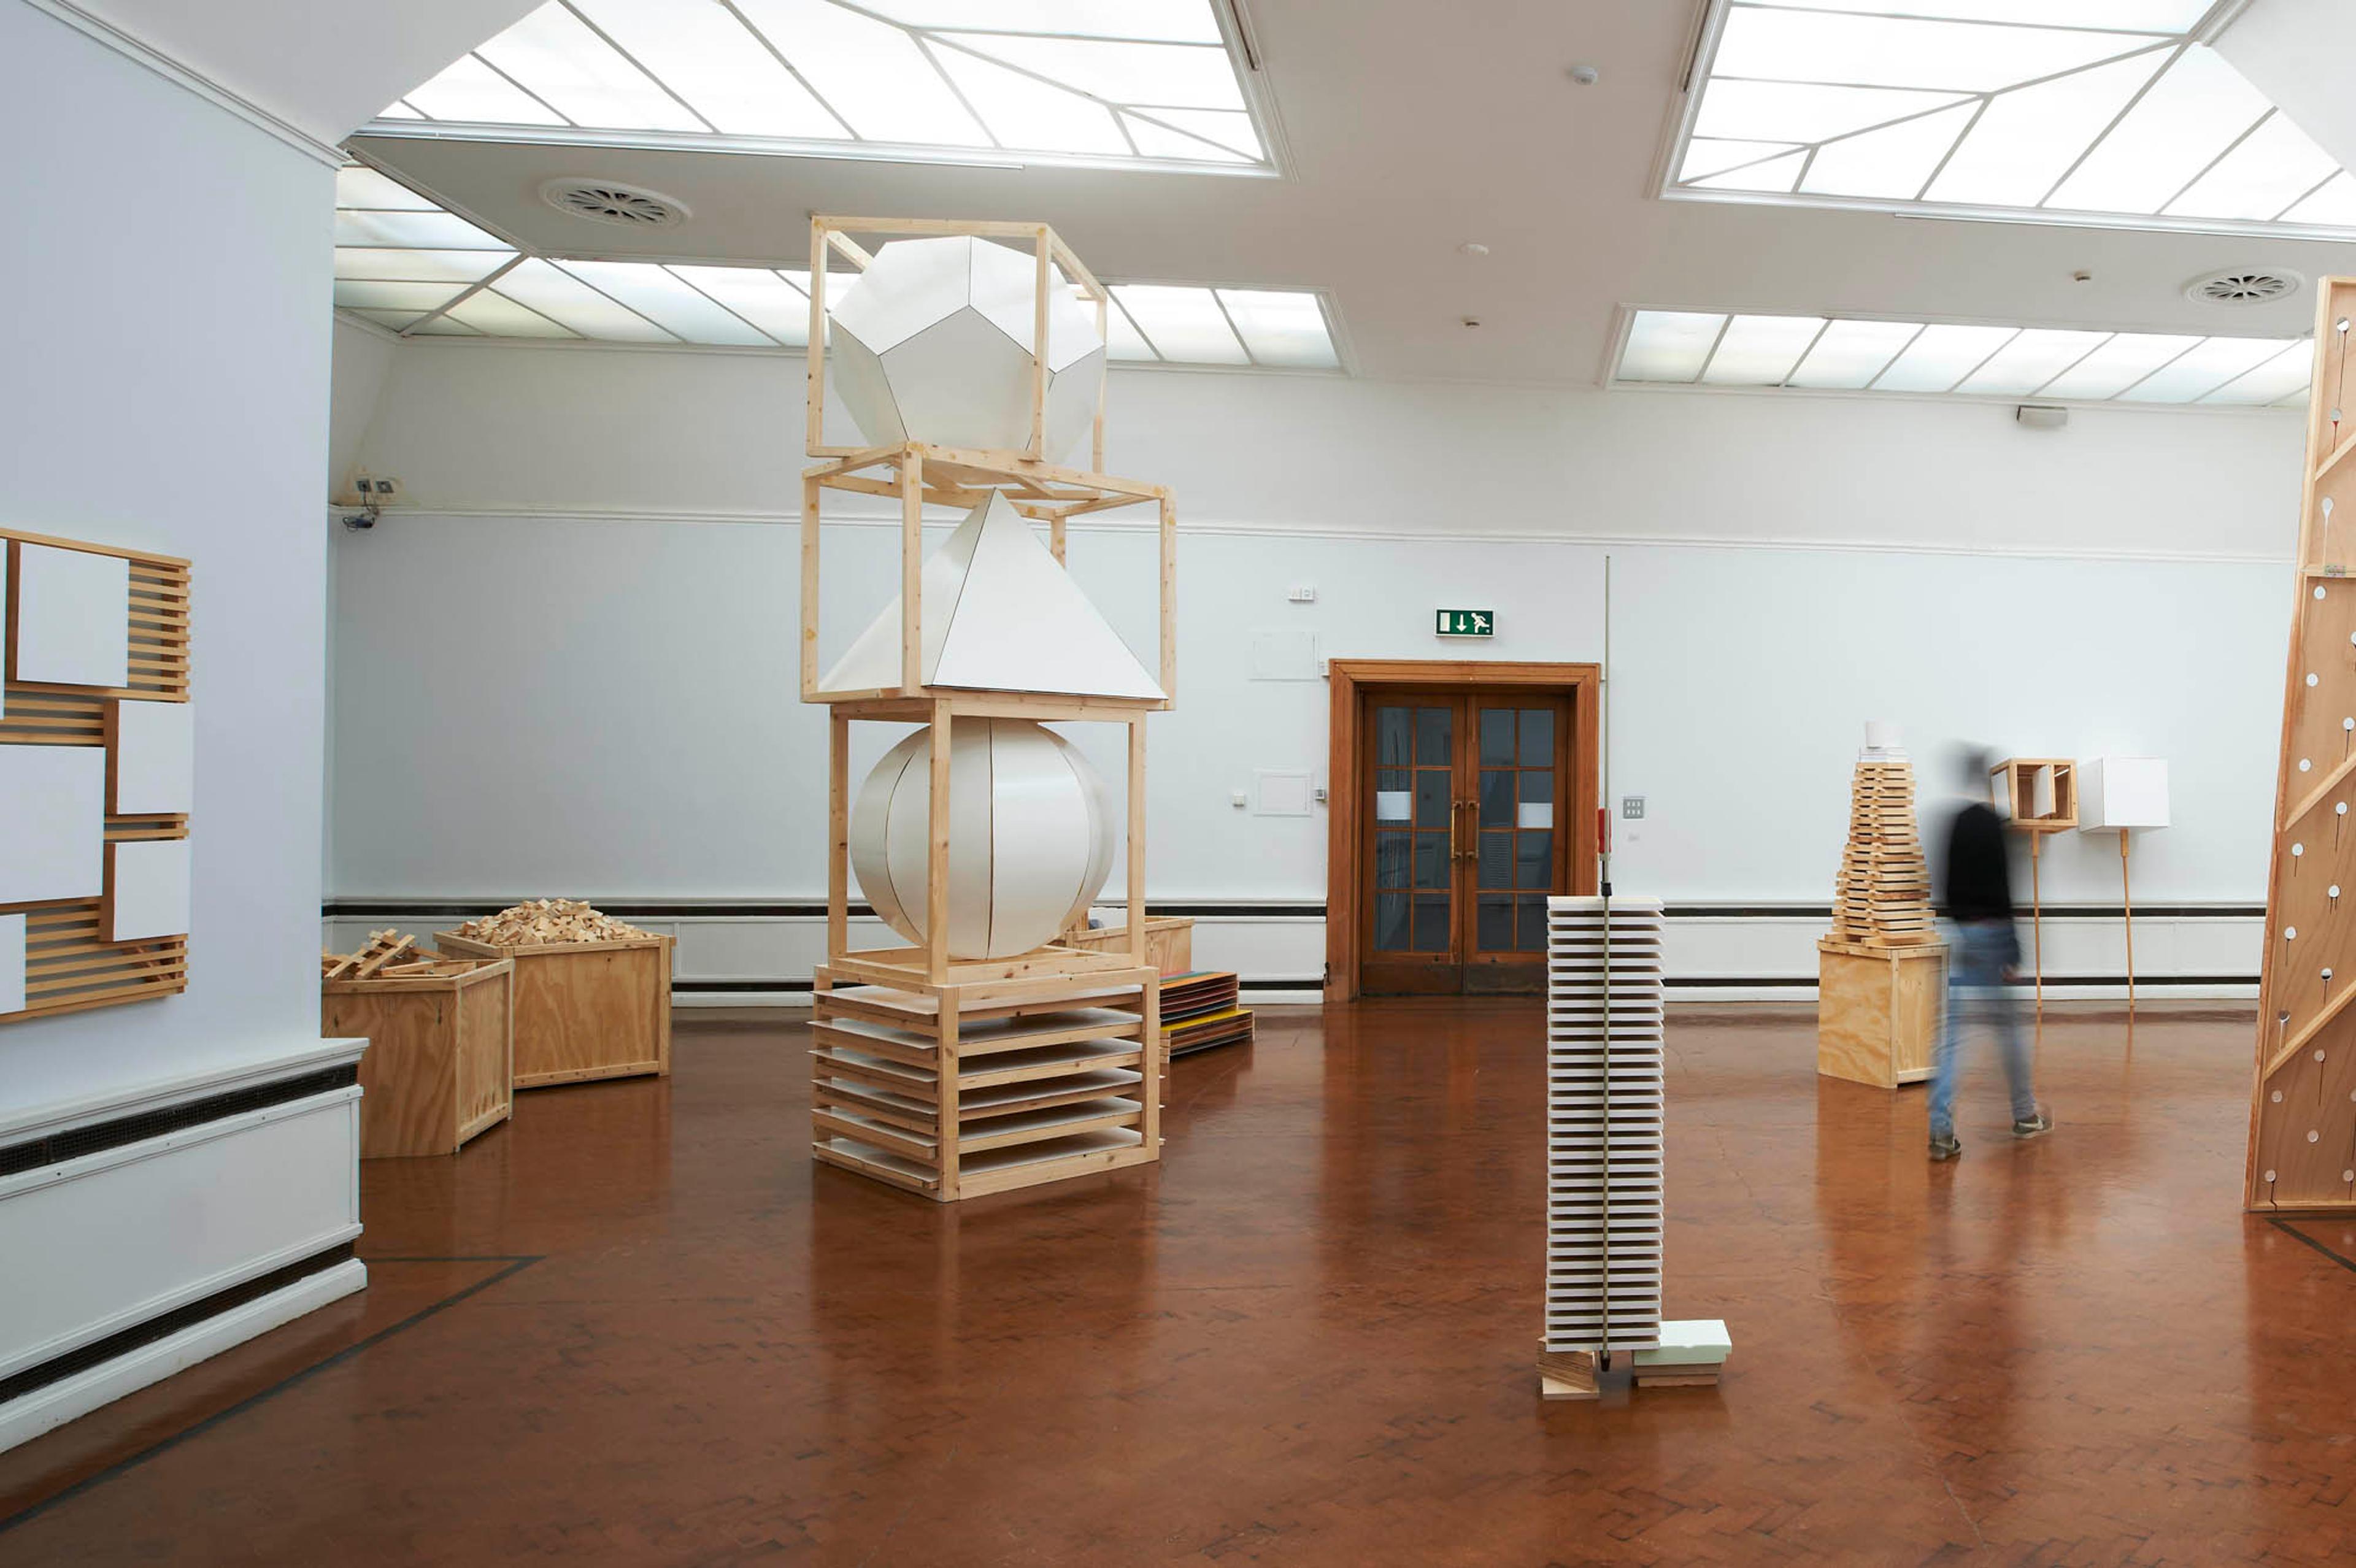 (2014) Alon Levin, End to the Grand Gesture, 2011 - 2014, sculptural installation.